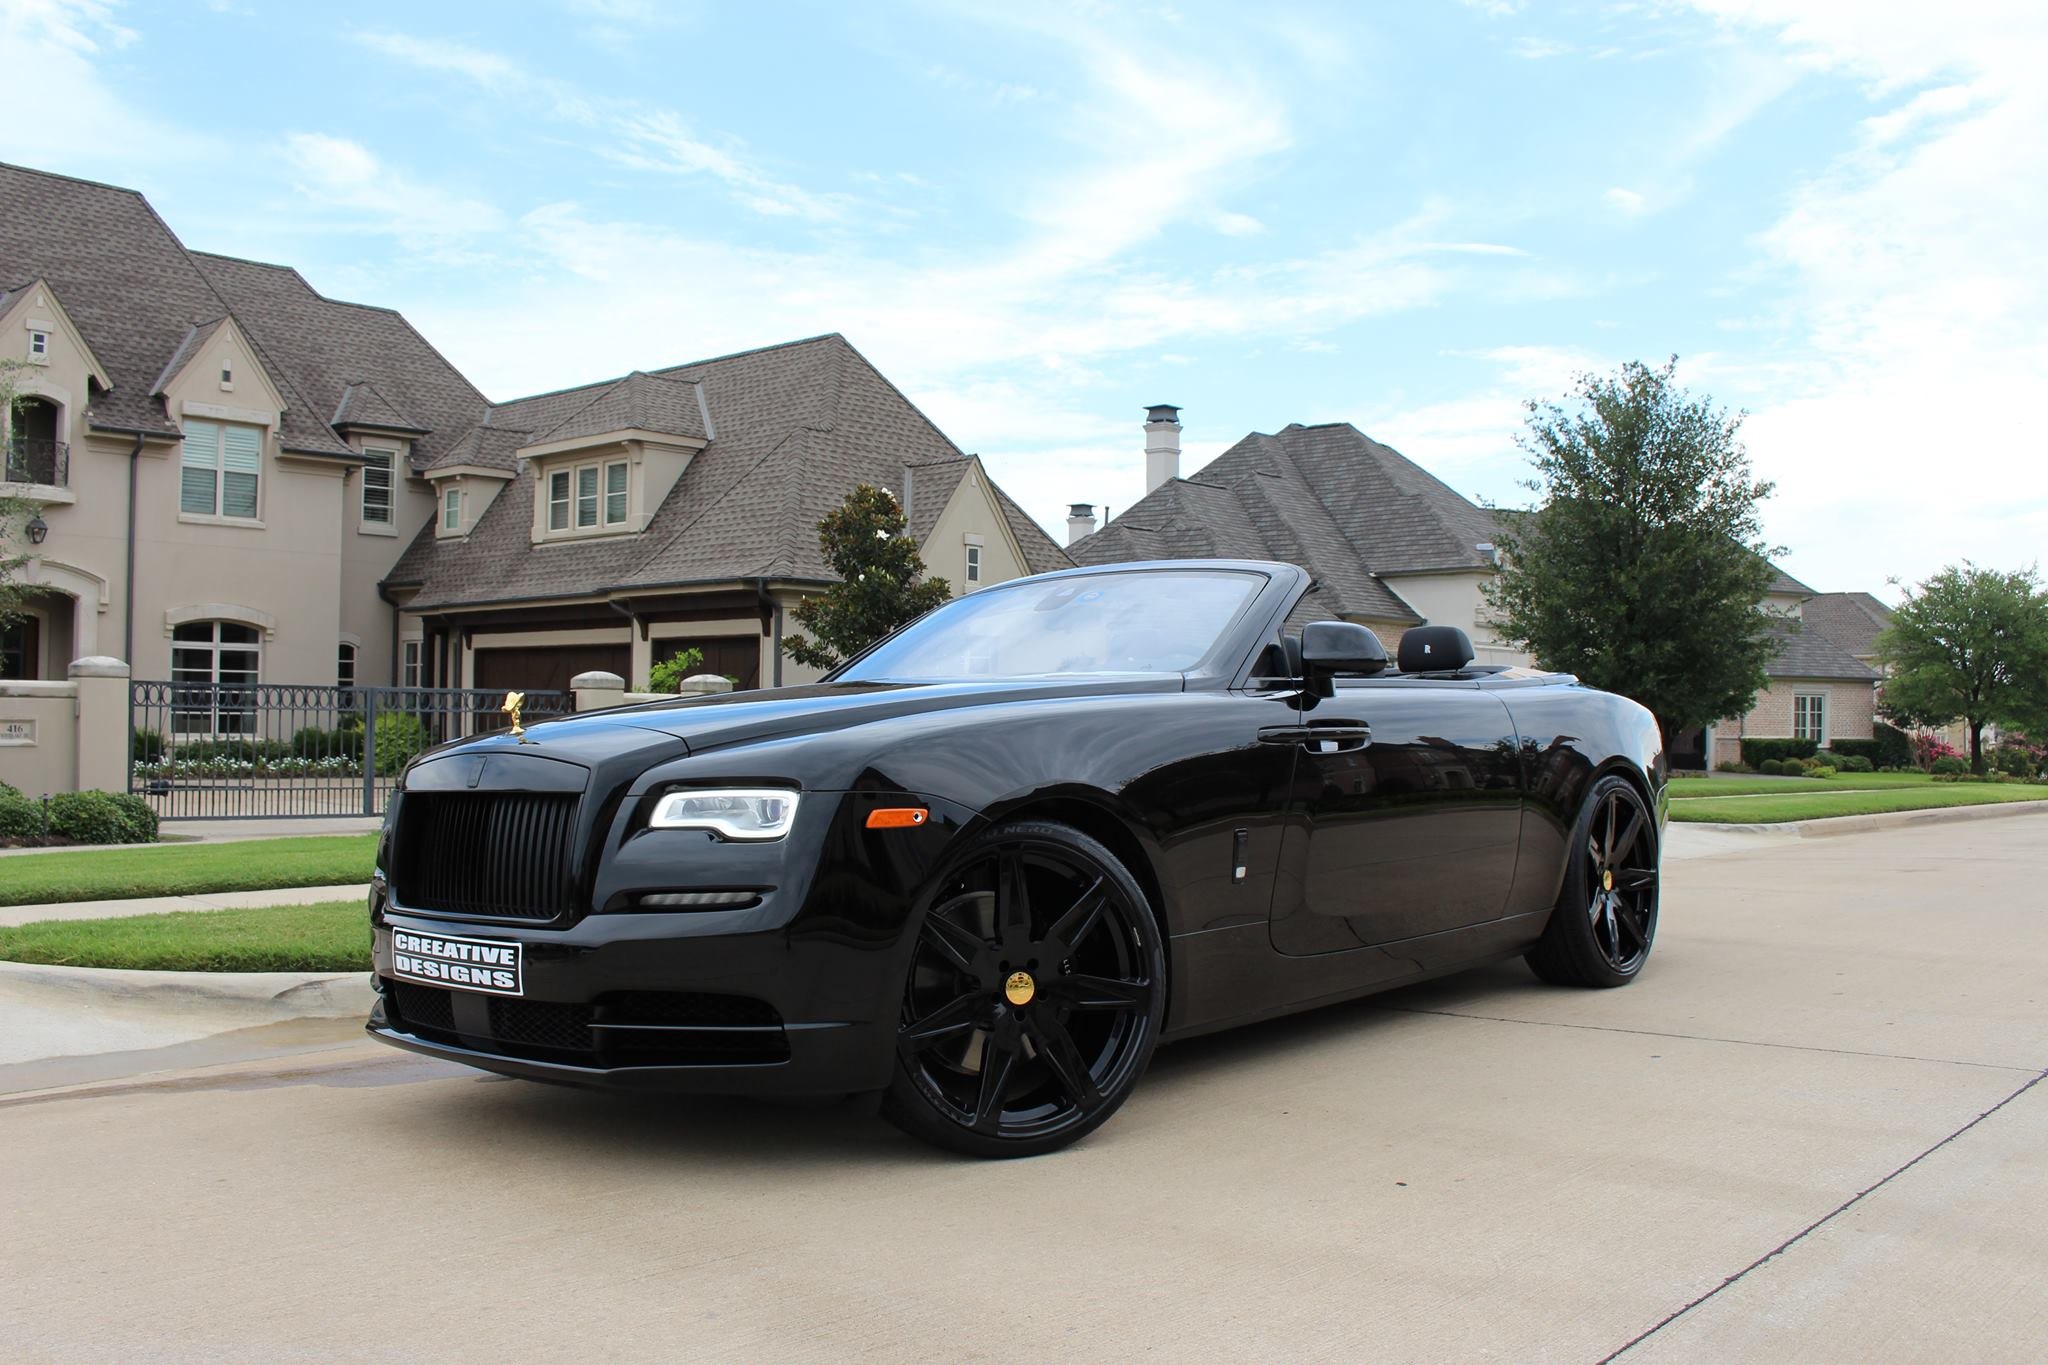 Convertible Rolls Royce Wraith with Blacked Out Grille - Photo by Forgiato